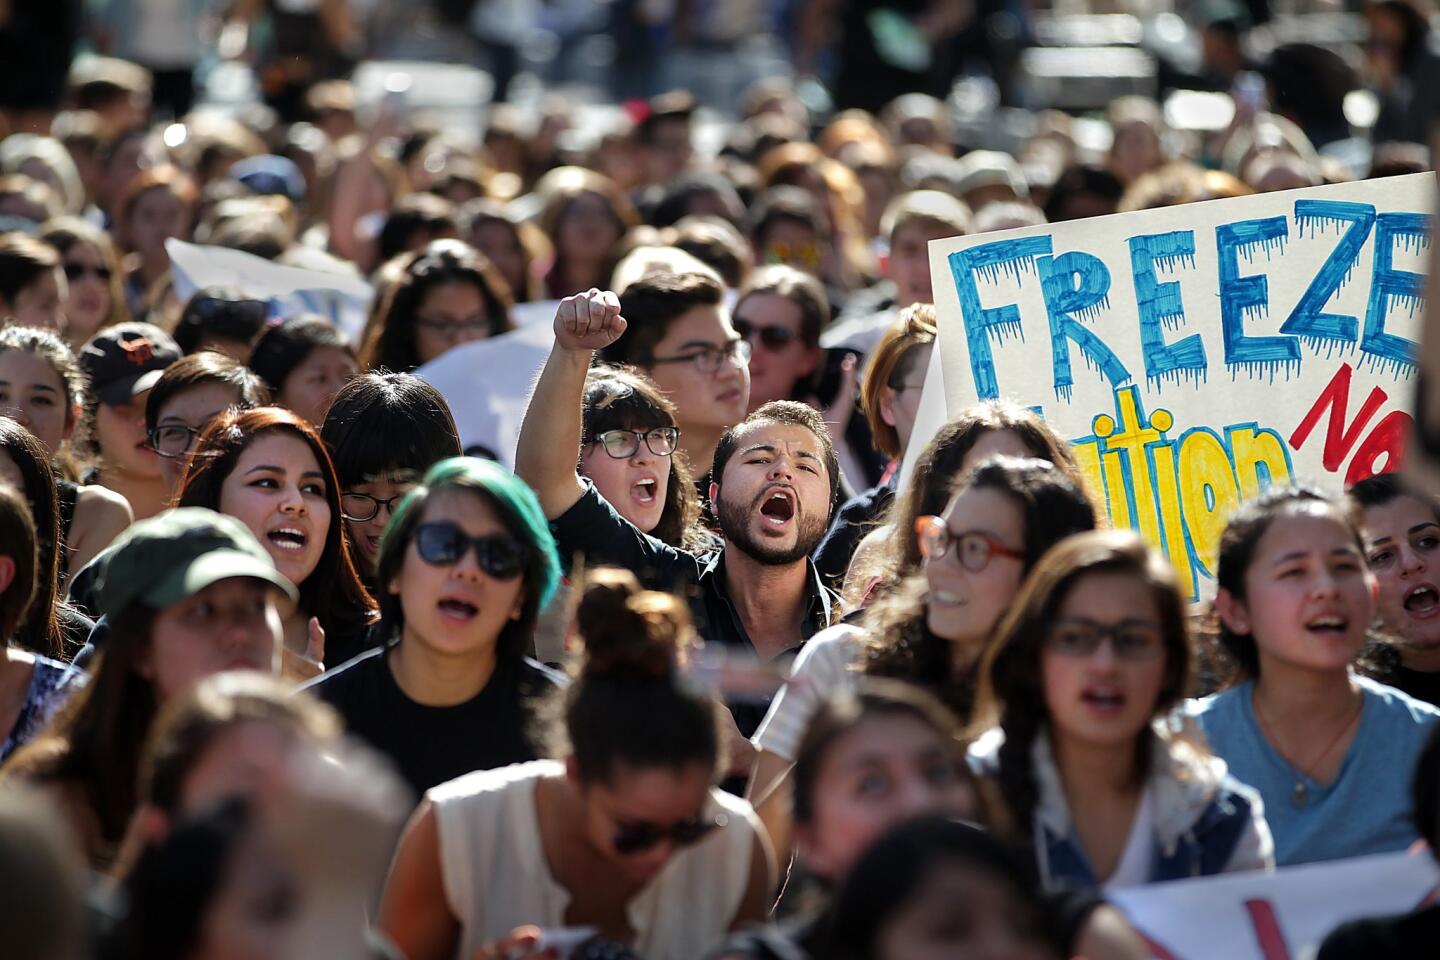 UCSD students protest tuition hikes